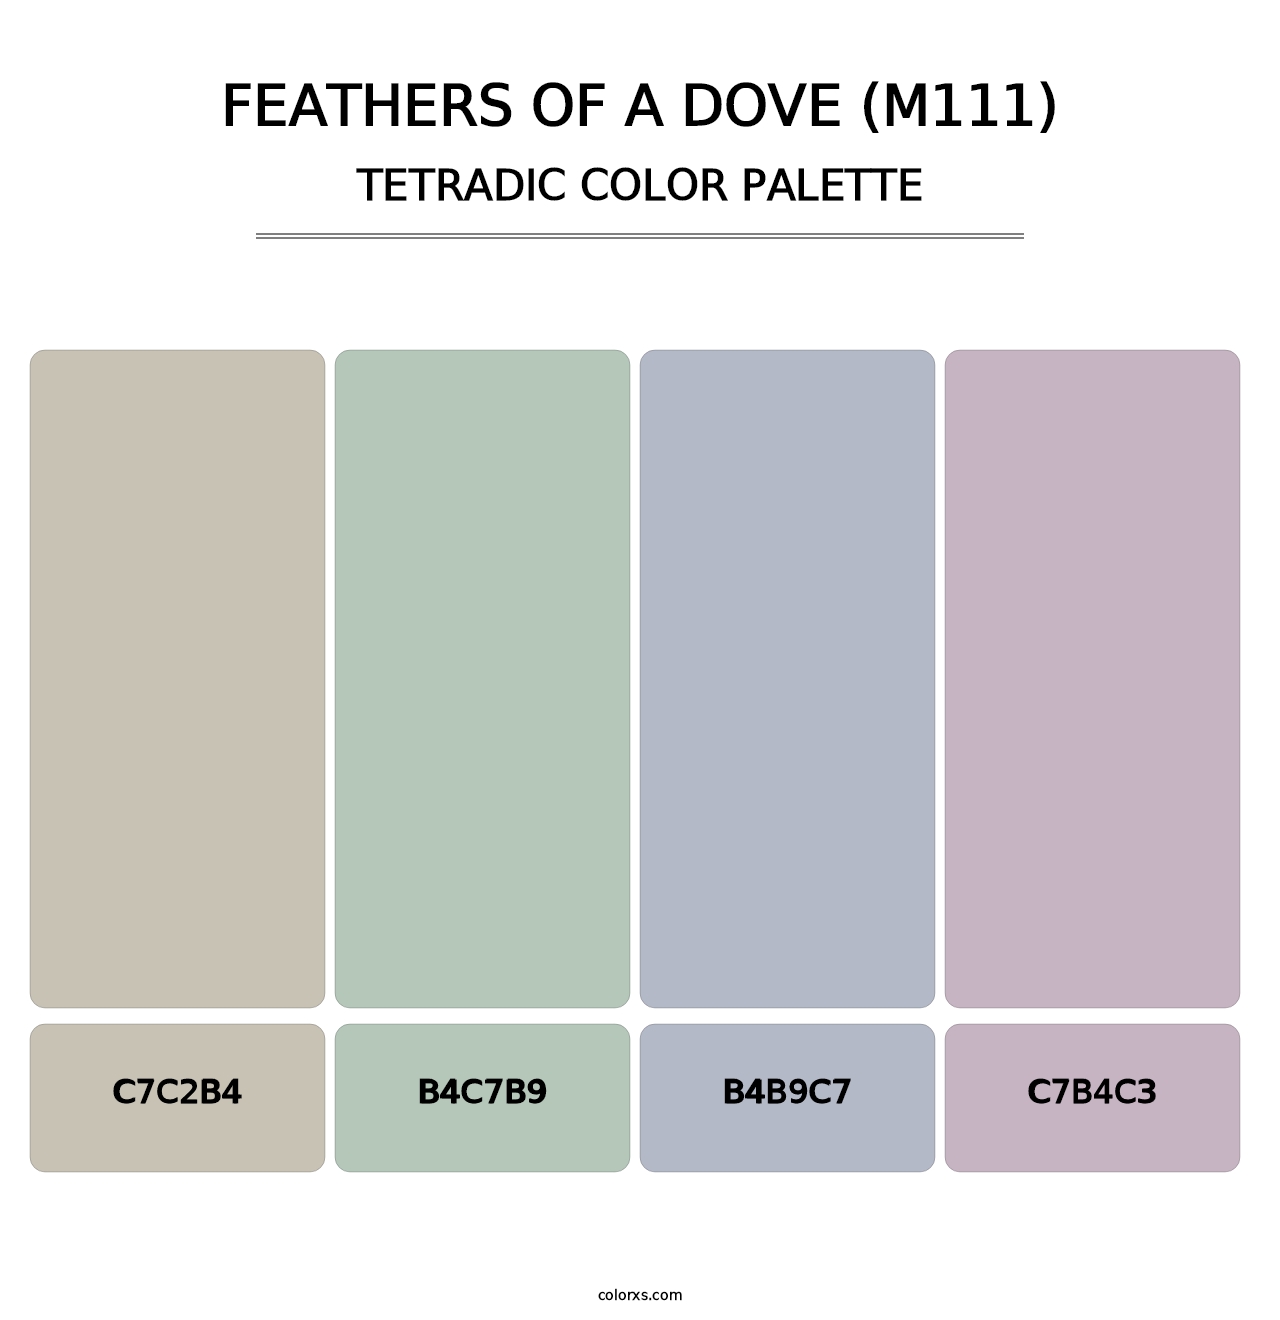 Feathers of a Dove (M111) - Tetradic Color Palette